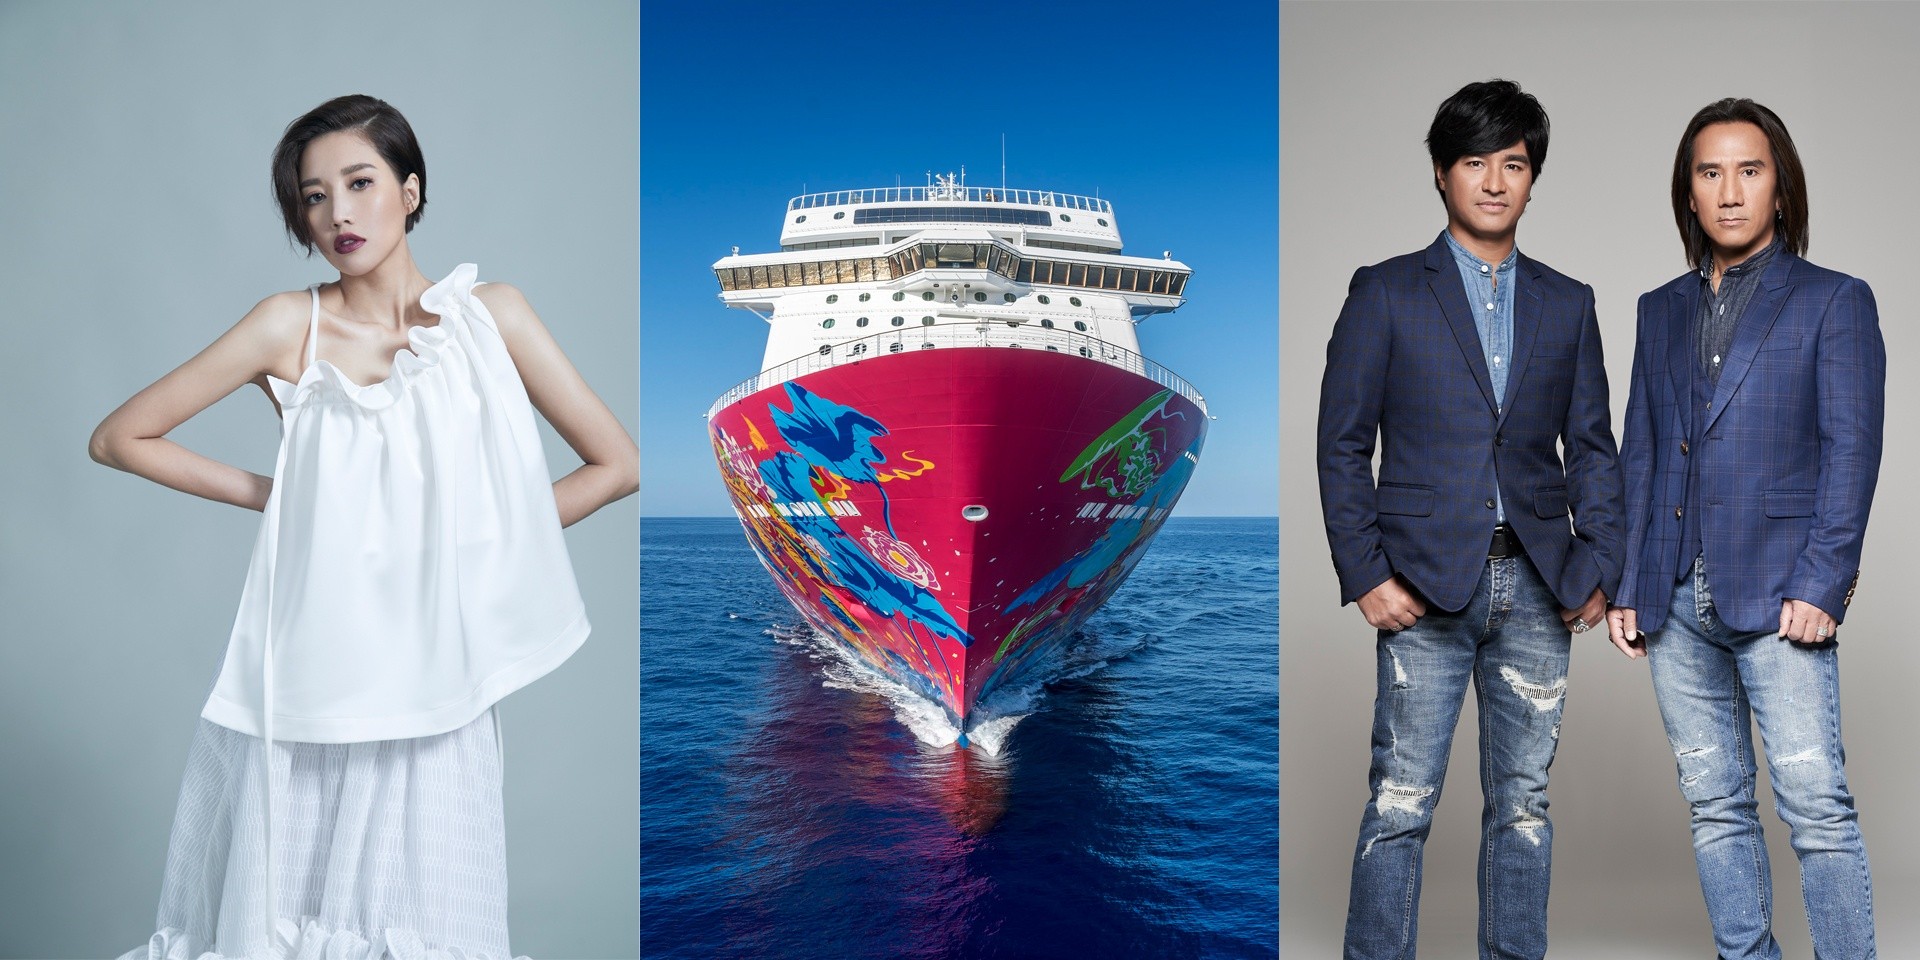 A-Lin and Power Station to hold concerts on board Genting Dream cruises